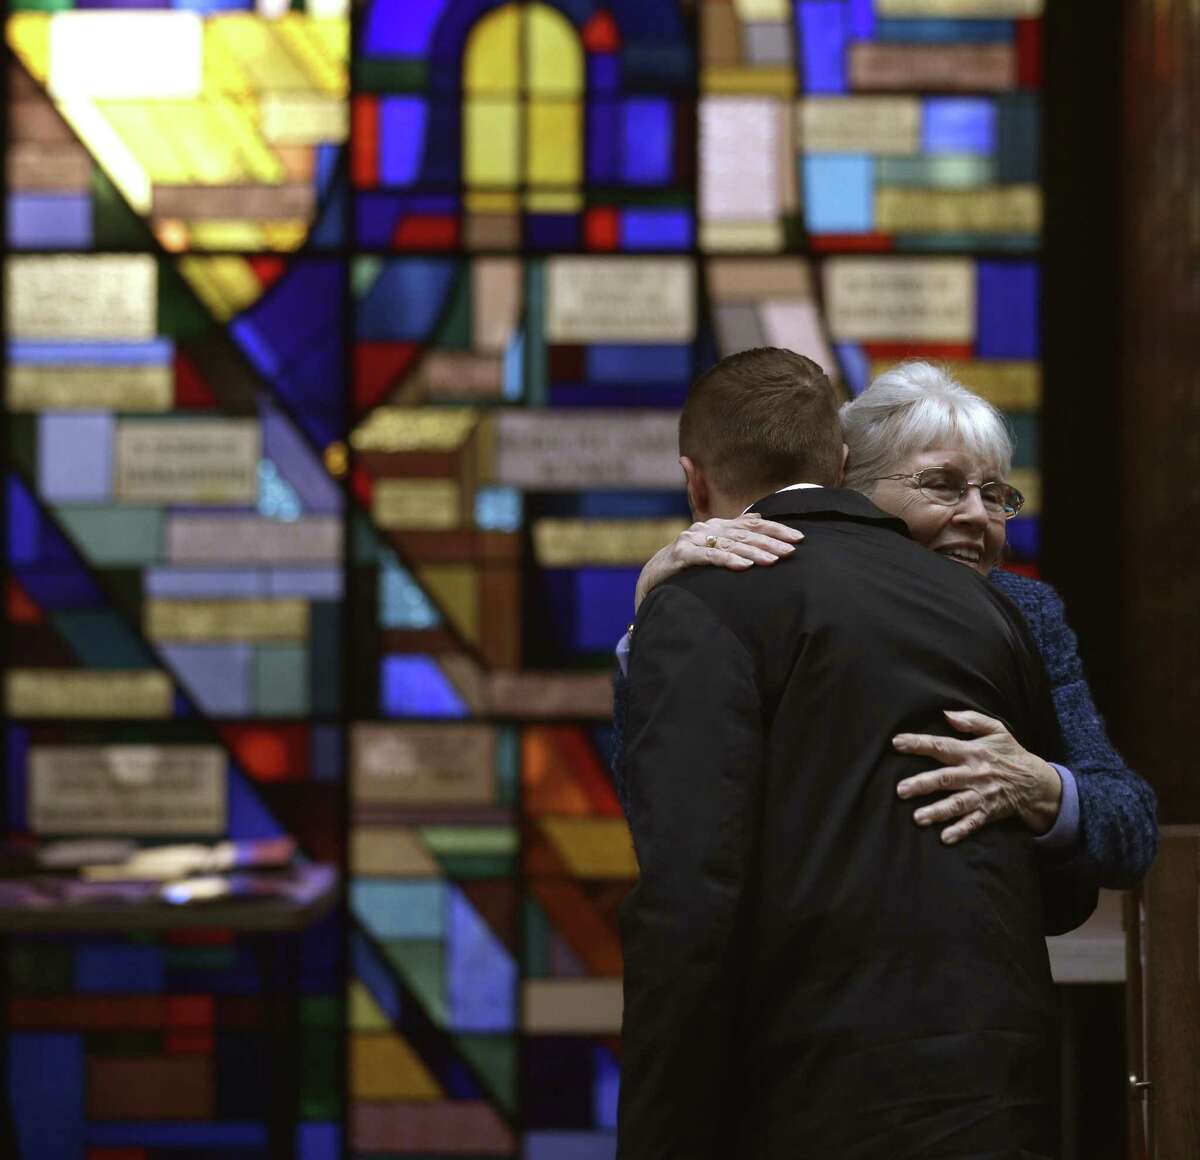 Sue Haff, right, a member of Trinity Episcopal Church in Boston, greets a man arriving at Temple Israel, which allowed the Trinity congregation to hold Sunday service, Sunday, April 21, 2013, in Boston. Trinity is within the blocked-off area near the finish line of the Boston Marathon, where earlier in the week two bombs exploded.